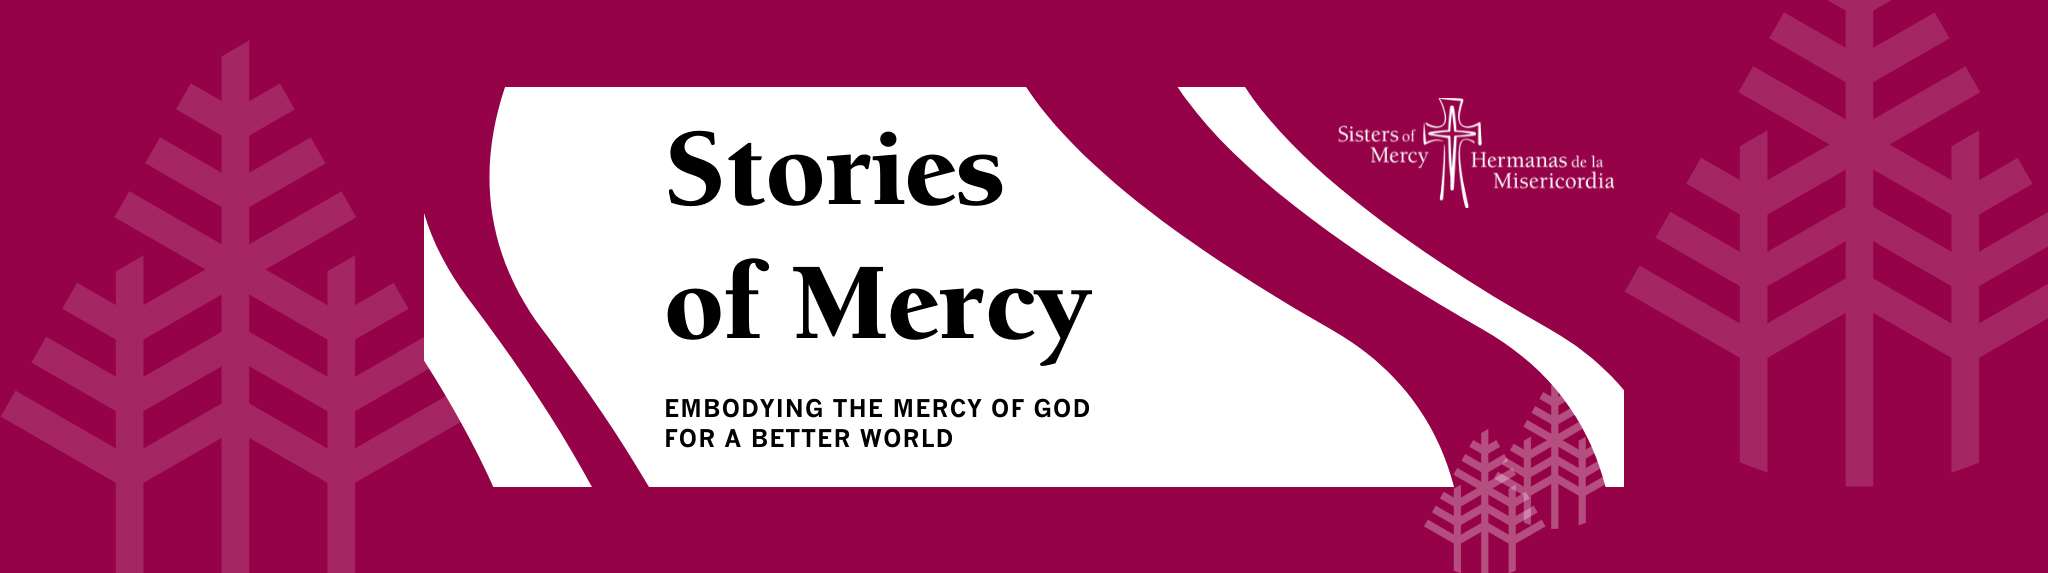 Stories of Mercy, Sisters of Mercy